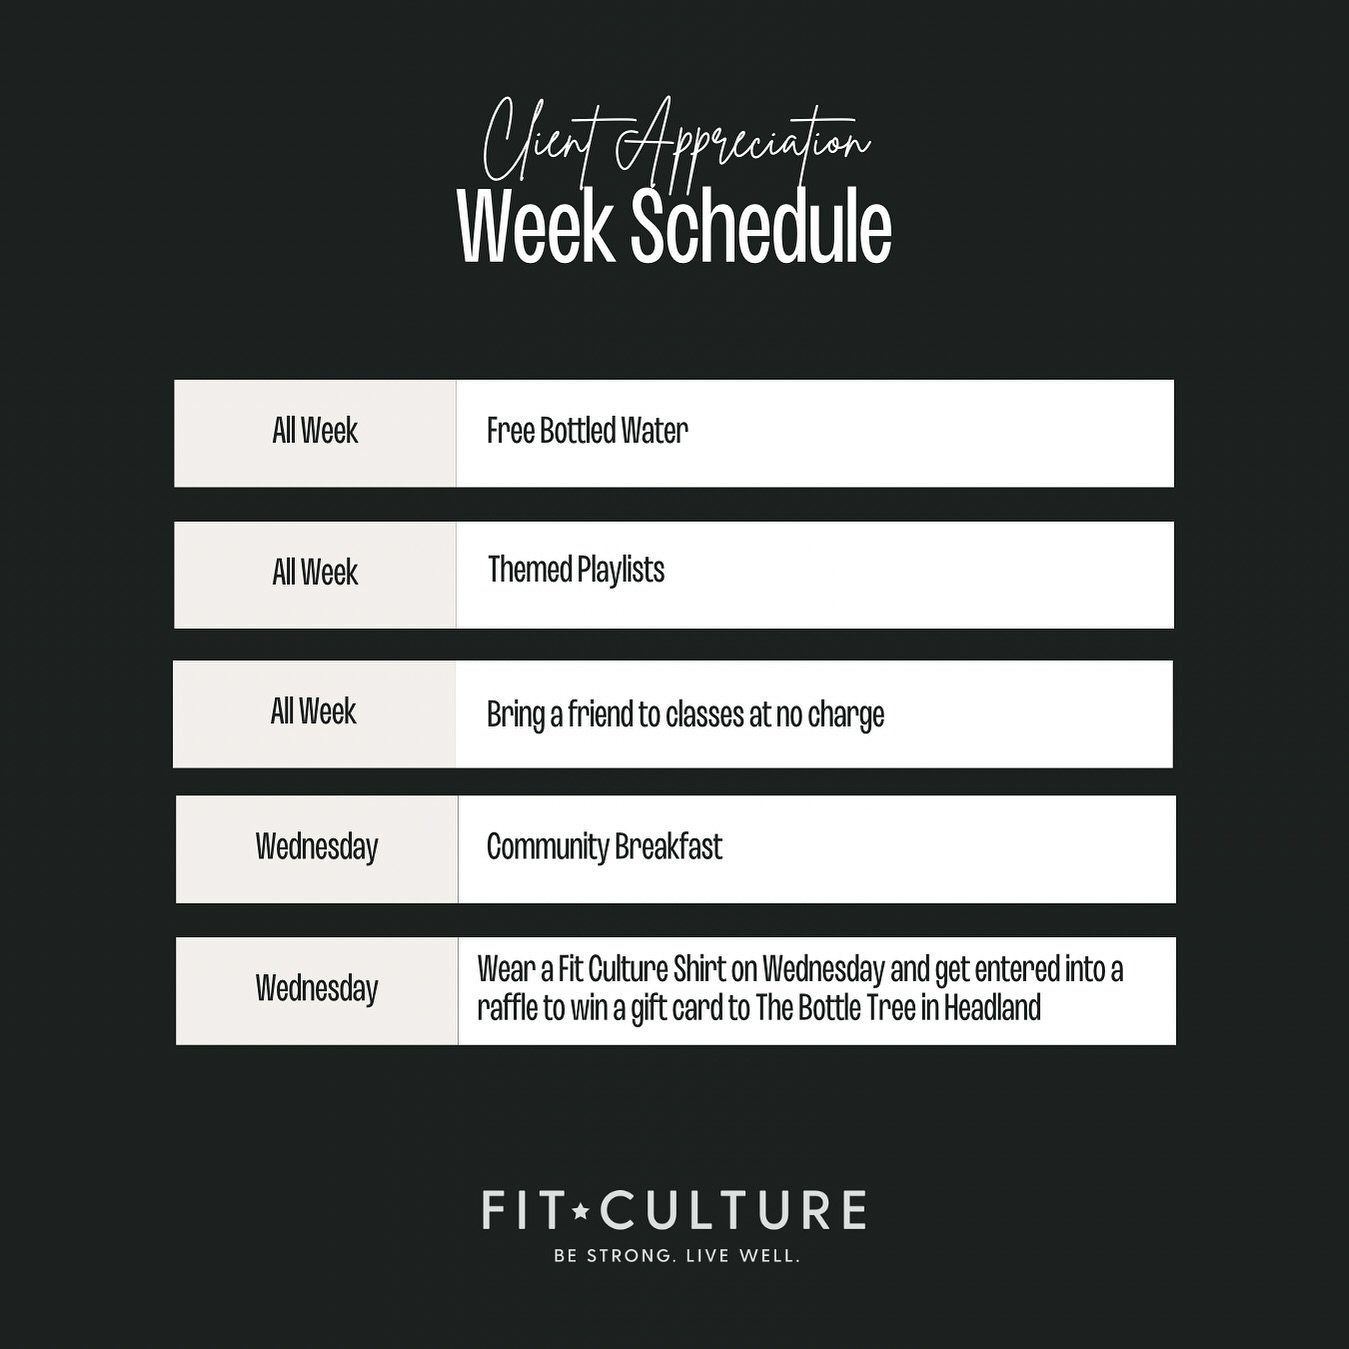 The week of April 22nd is Member Appreciation Week and we are going to celebrate YOU!

If you are member with us, here are the perks:
&bull;Bring a Friend to Class All Week at No Cost
&bull;Community Breakfast on Wednesday Morning
&bull;Wear a Fit Cu